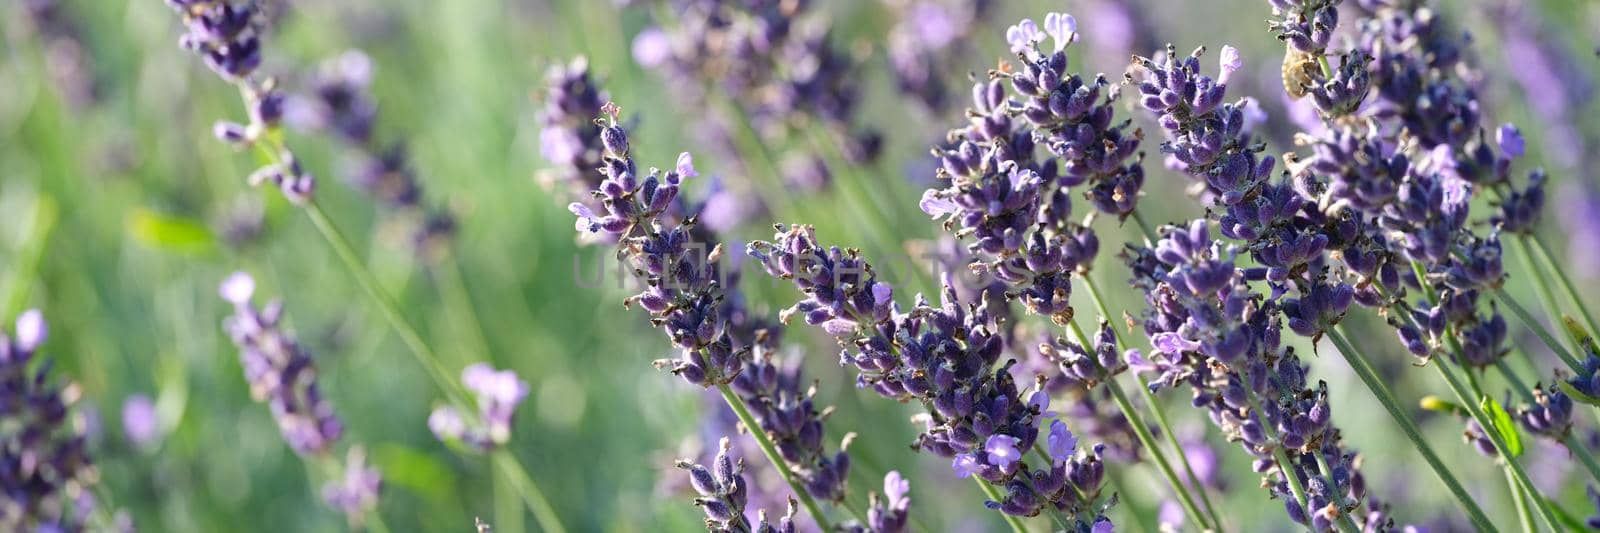 Purple lavender flowers growing on field closeup background. Aromatherapy concept